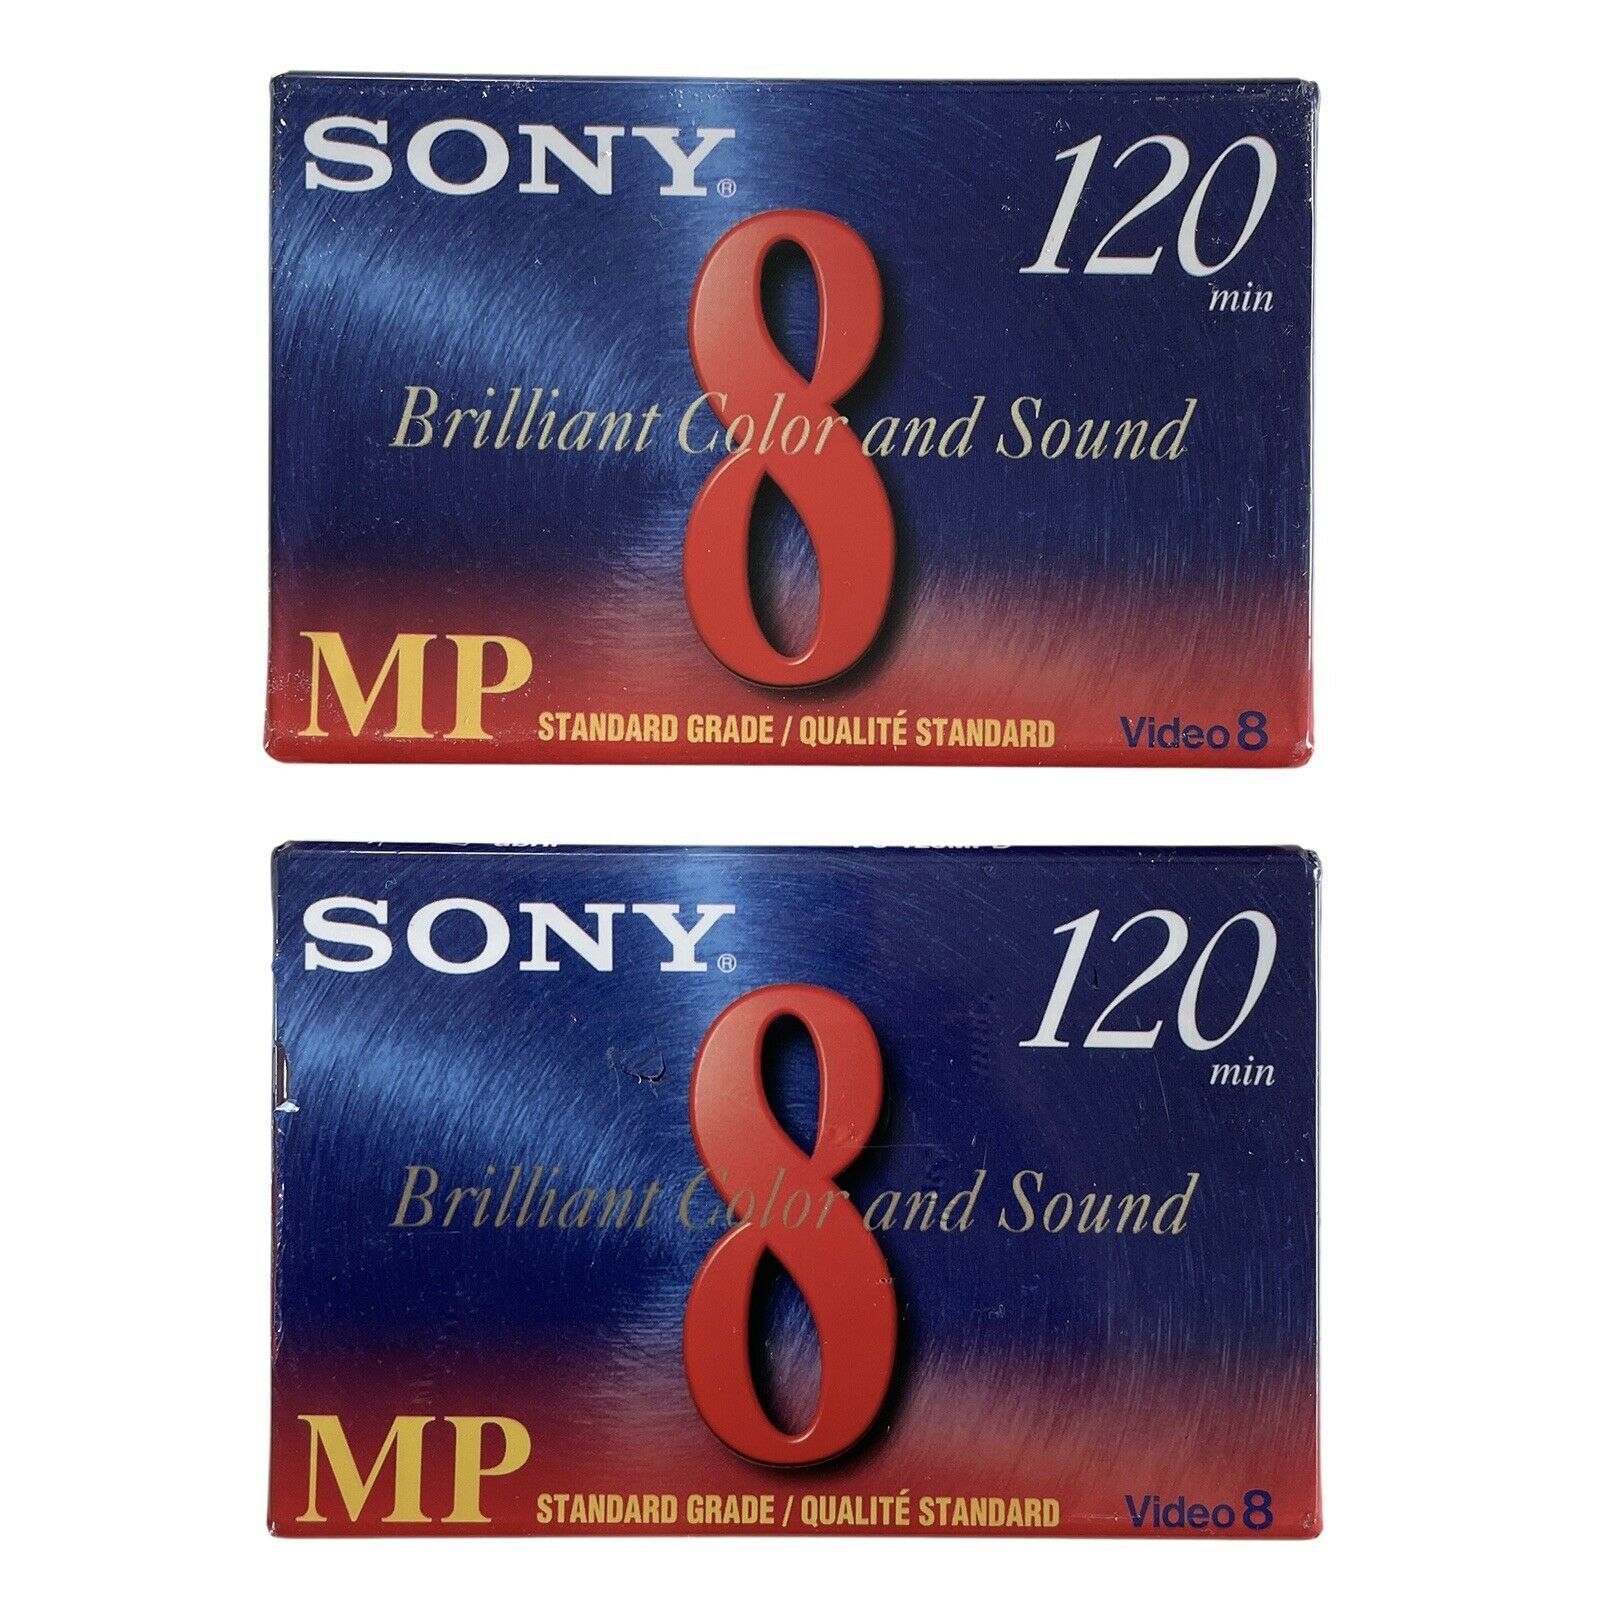 Sony 8mm tape 120mm Blank Video Tape brand new - New Old Stock - $19.79